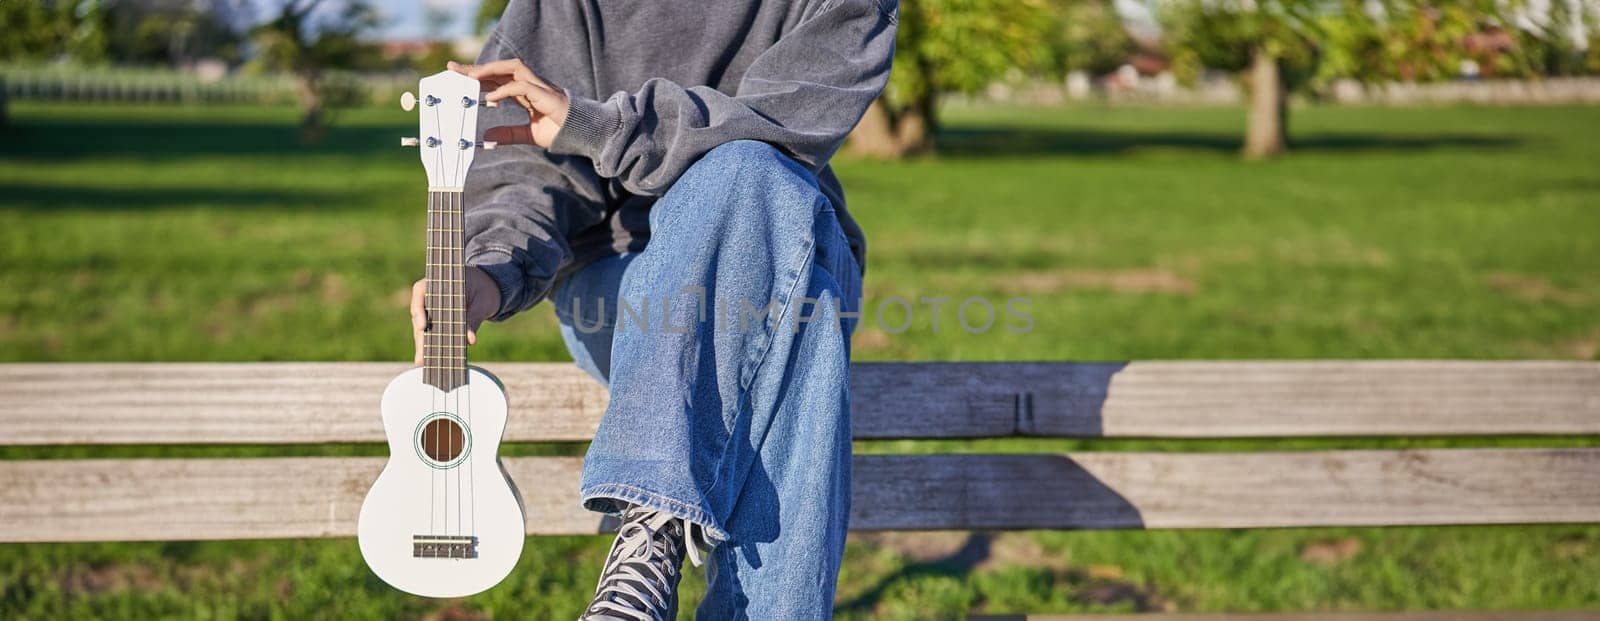 Cropped shot of young girl in sneakers and jeans, hands holding ukulele musical instrument while she sits on bench in green sunny park.